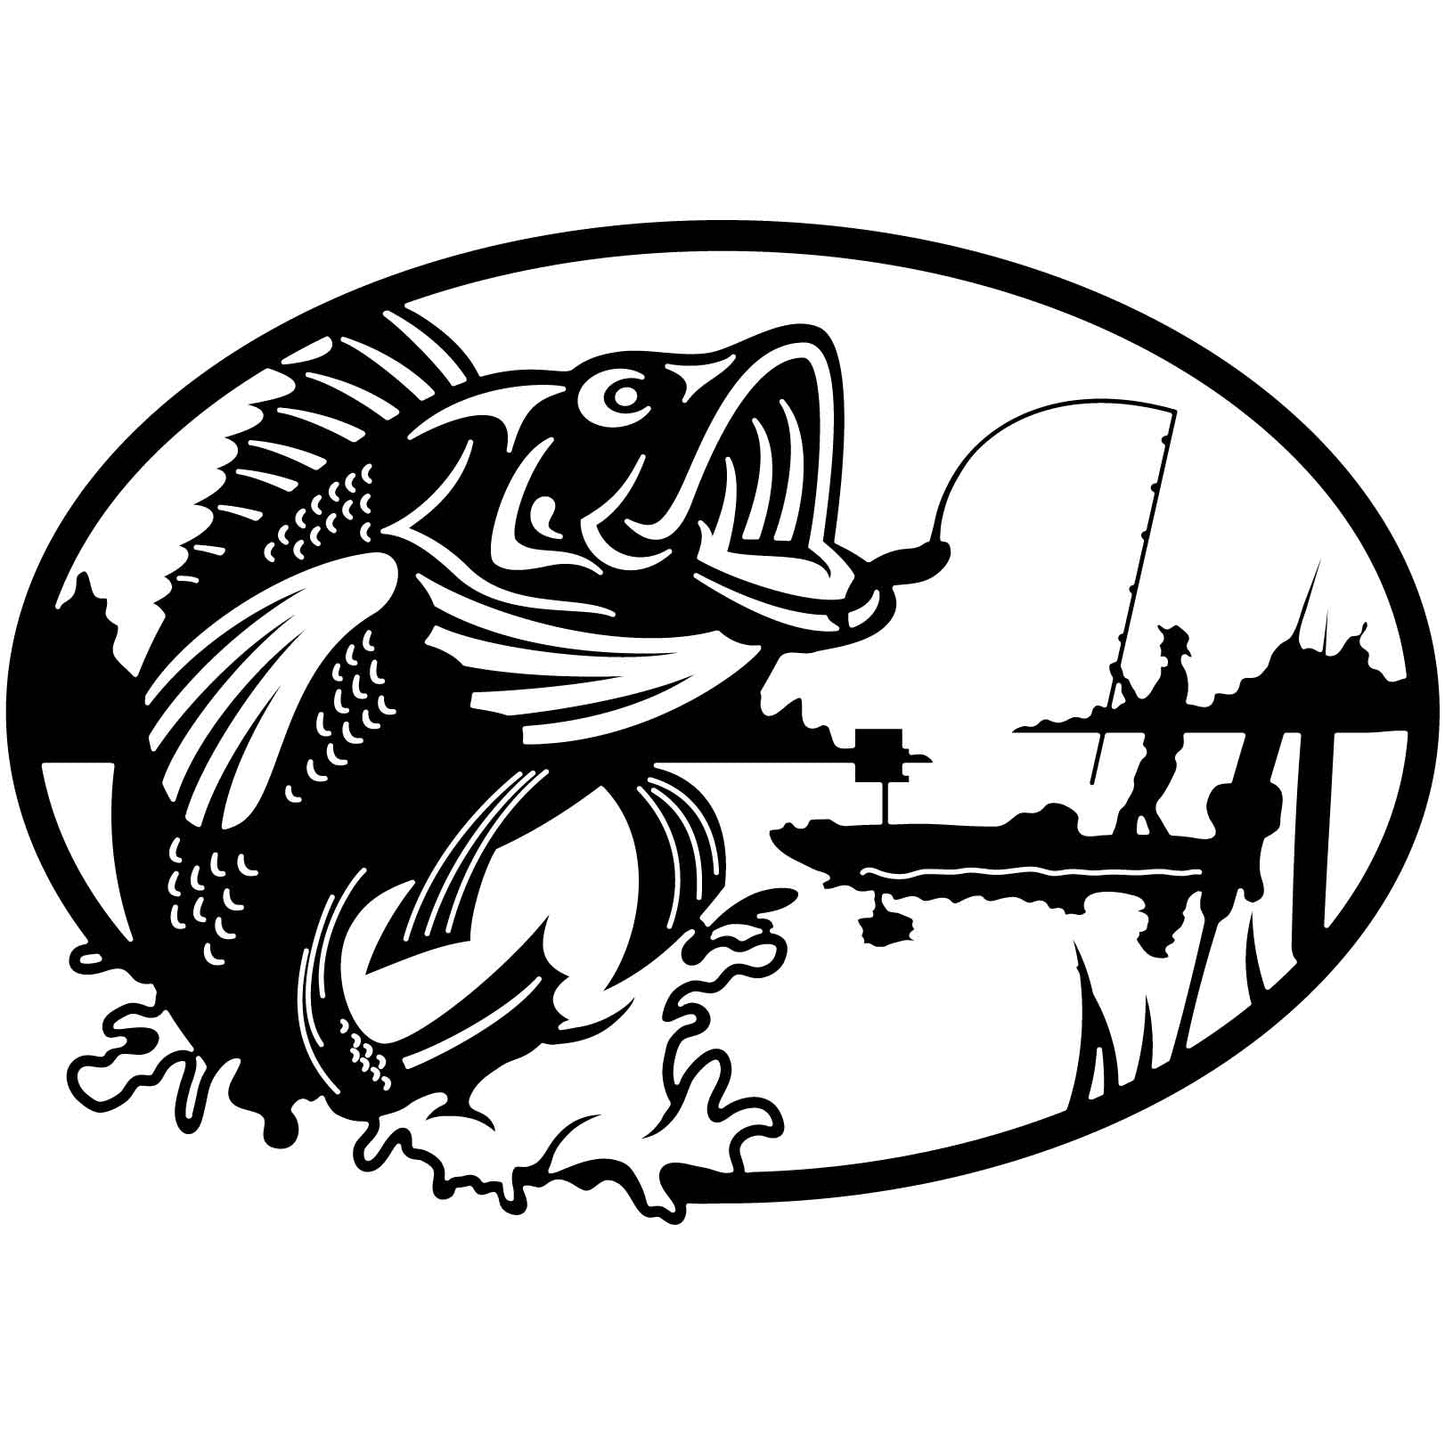 Fishing and Fisher Man Scene Oval-DXF File cut ready for CNC machines-dxfforcnc.com